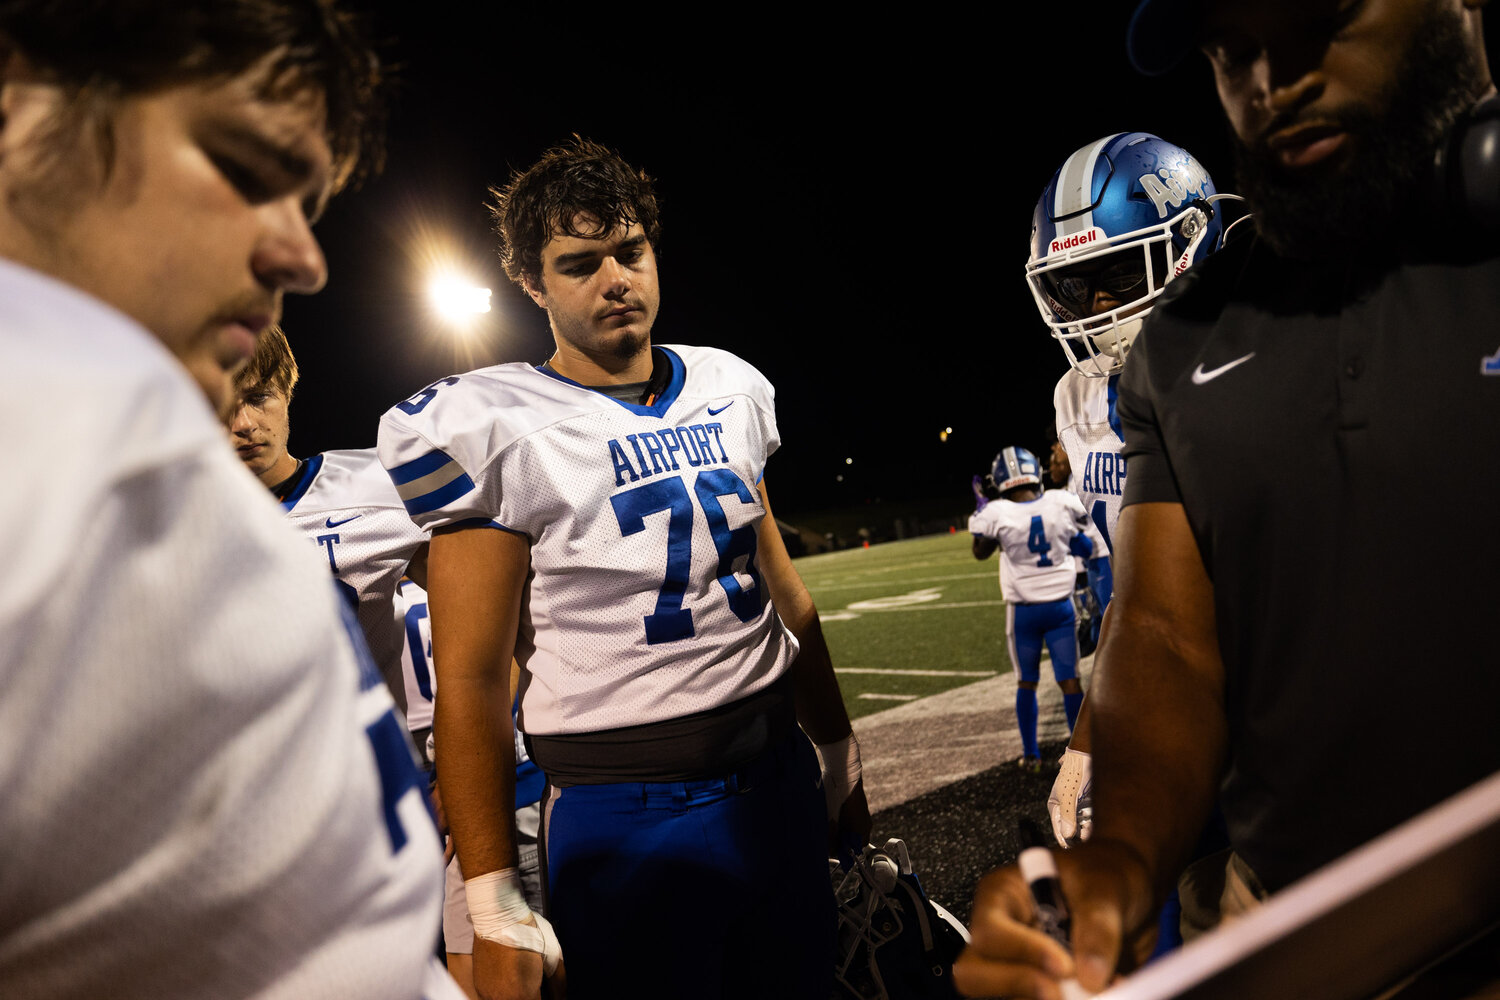 Airport Eagles offensive lineman Dylan Barbrey receives instructions in between drives against the Irmo Yellow Jackets.